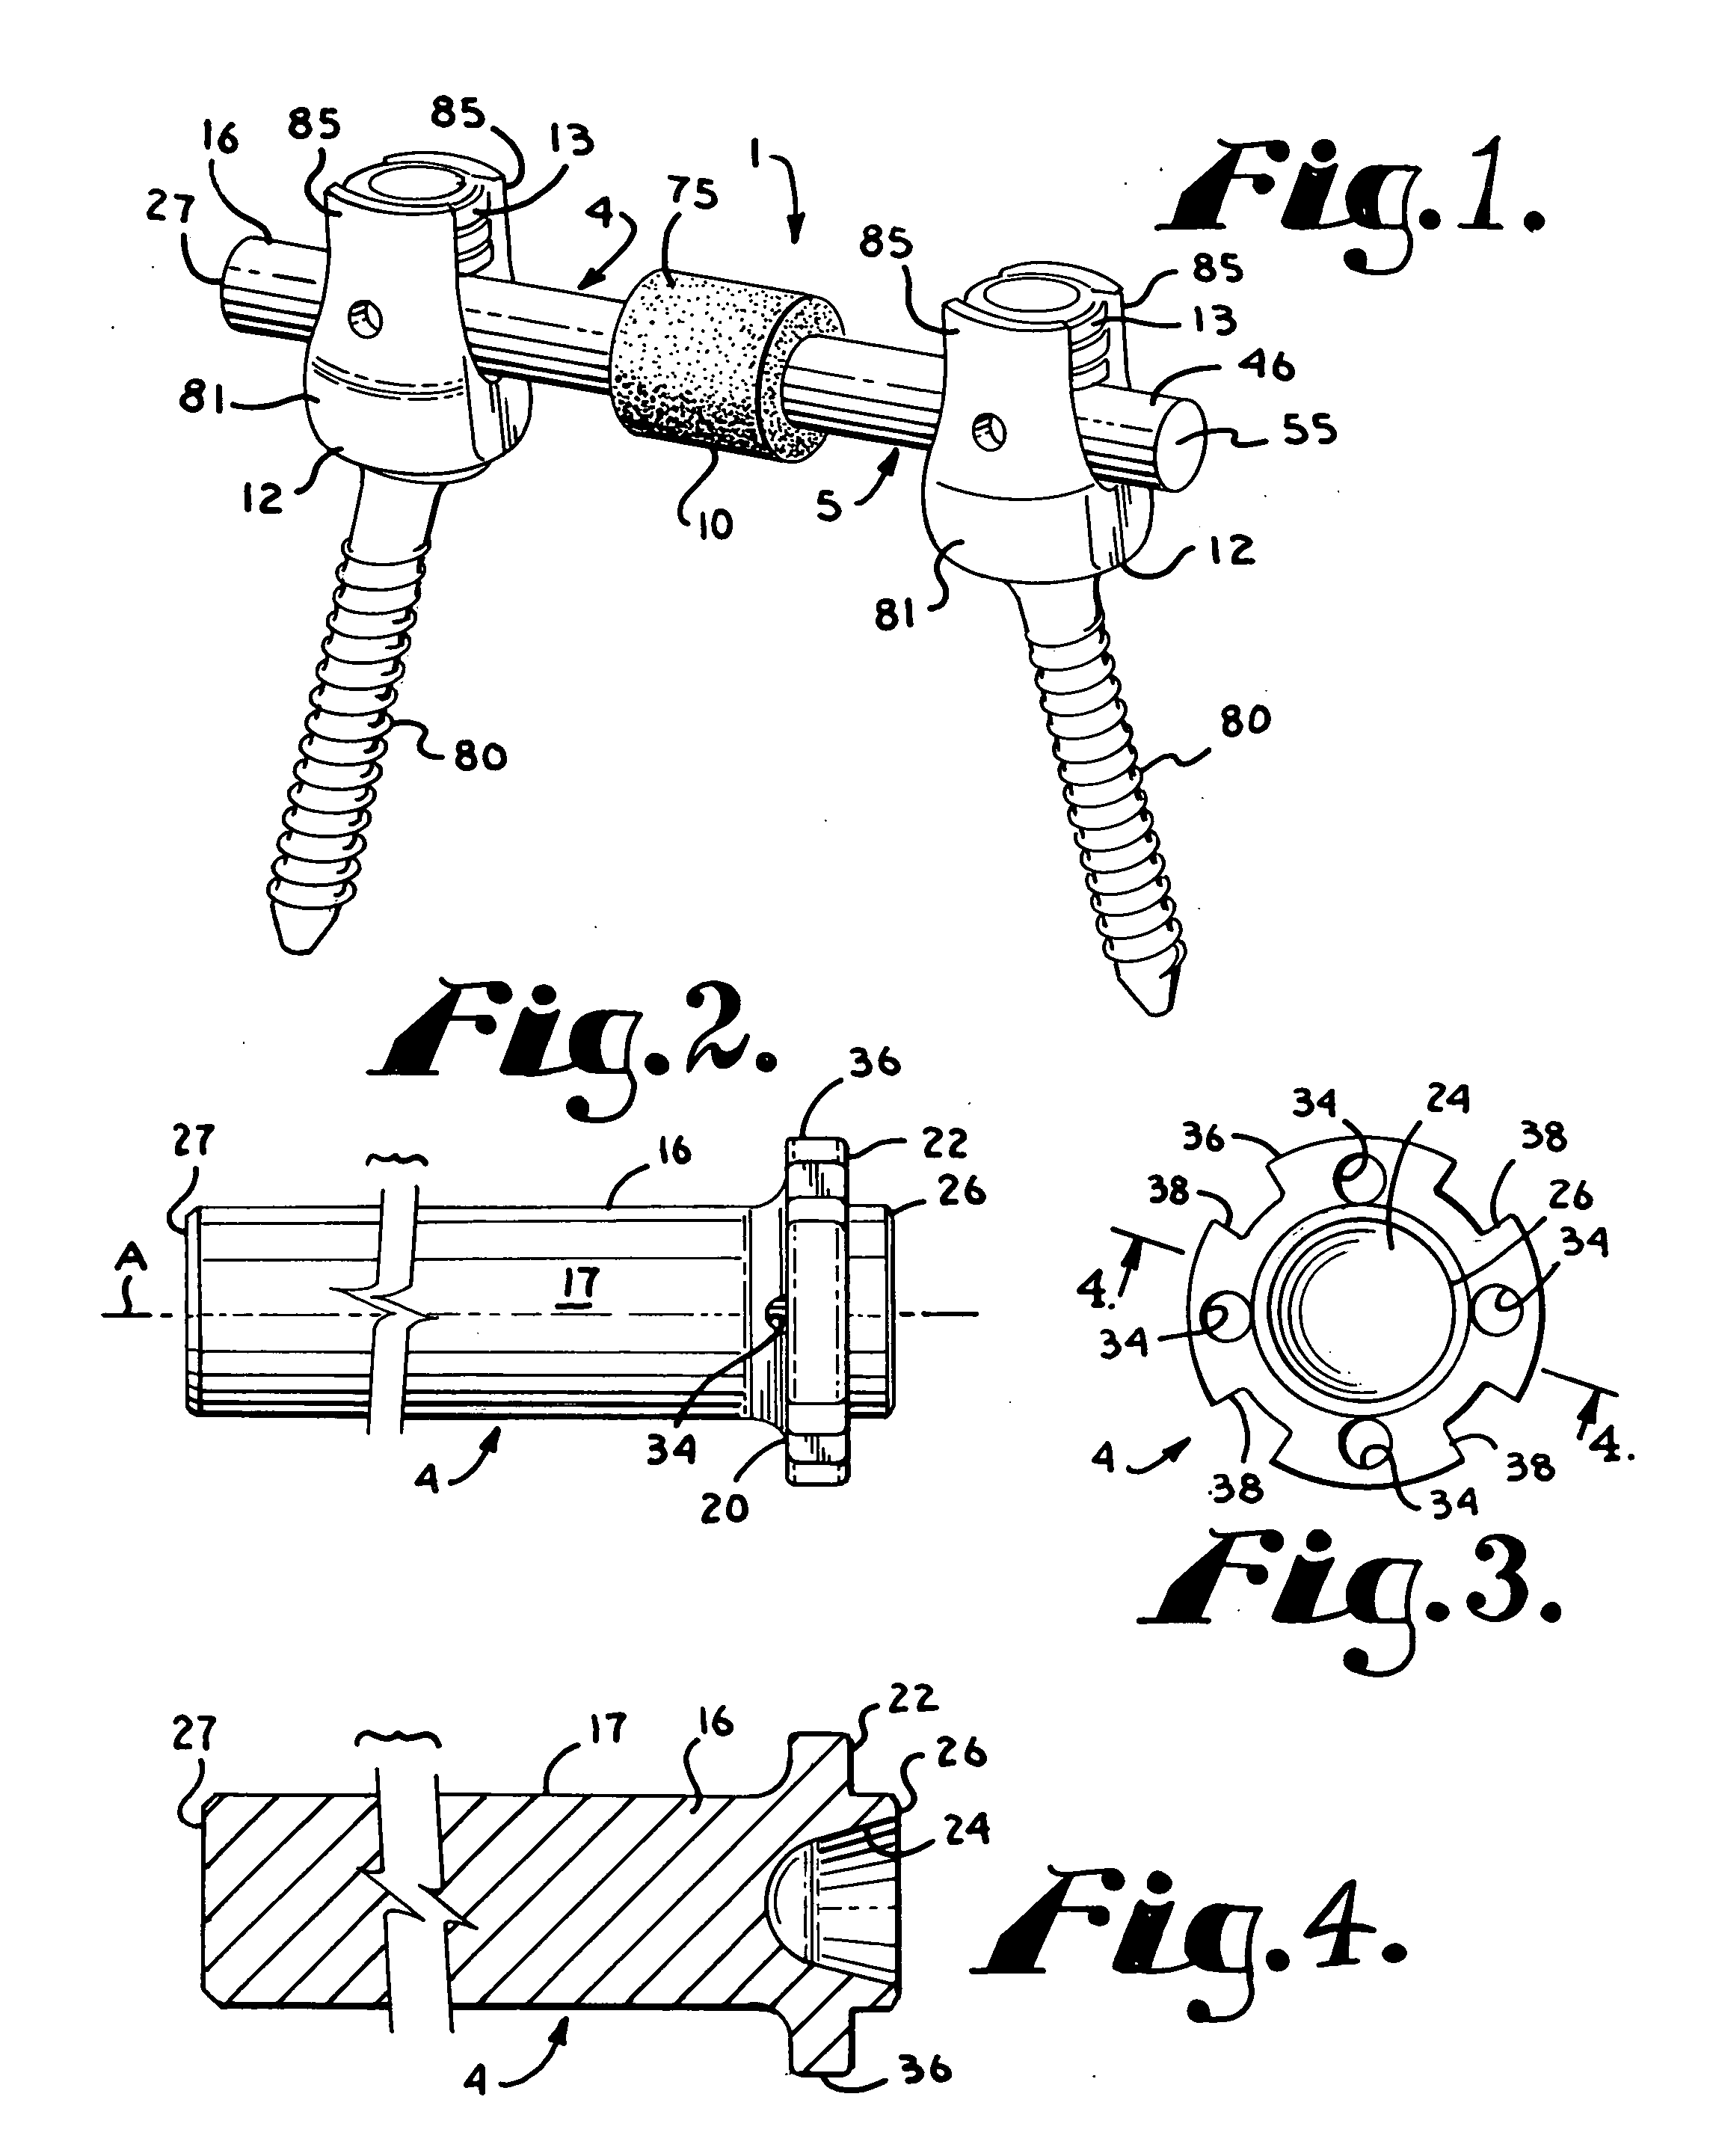 Dynamic stabilization assembly with frusto-conical connection